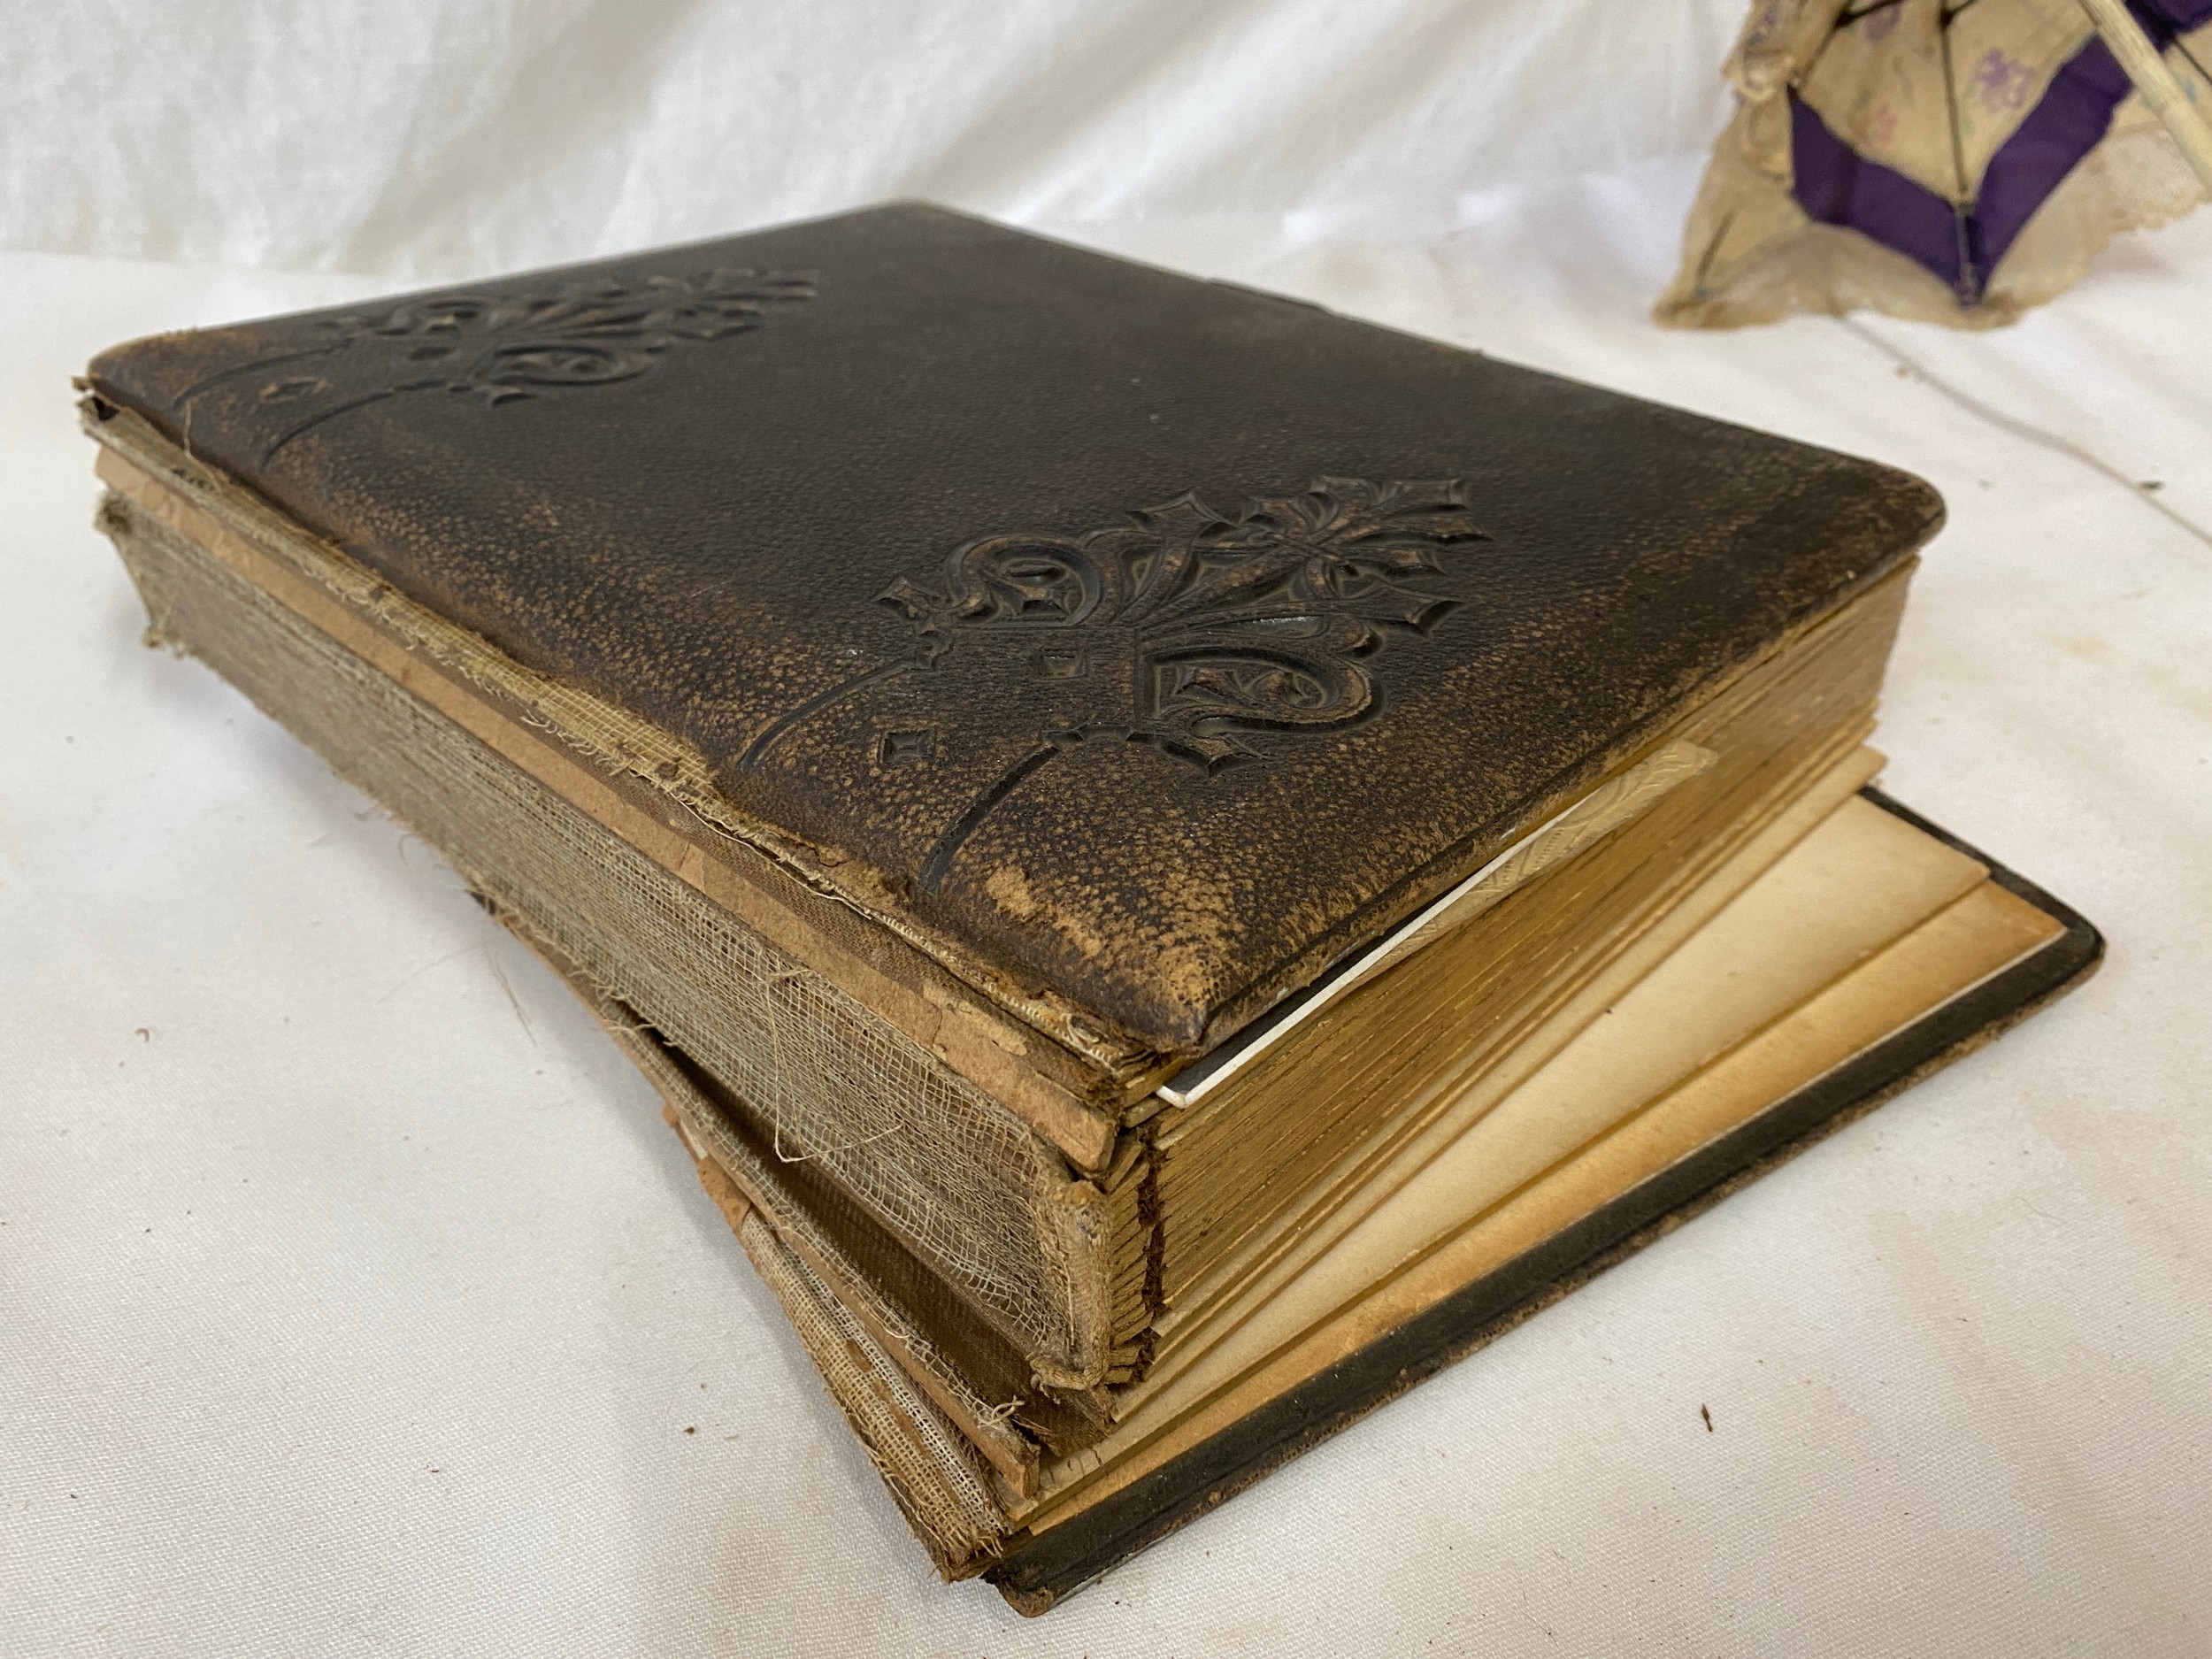 Photograph albums; Saltley College X'mas 1887 presented to Thomas Withers by his fellow students - Image 2 of 30